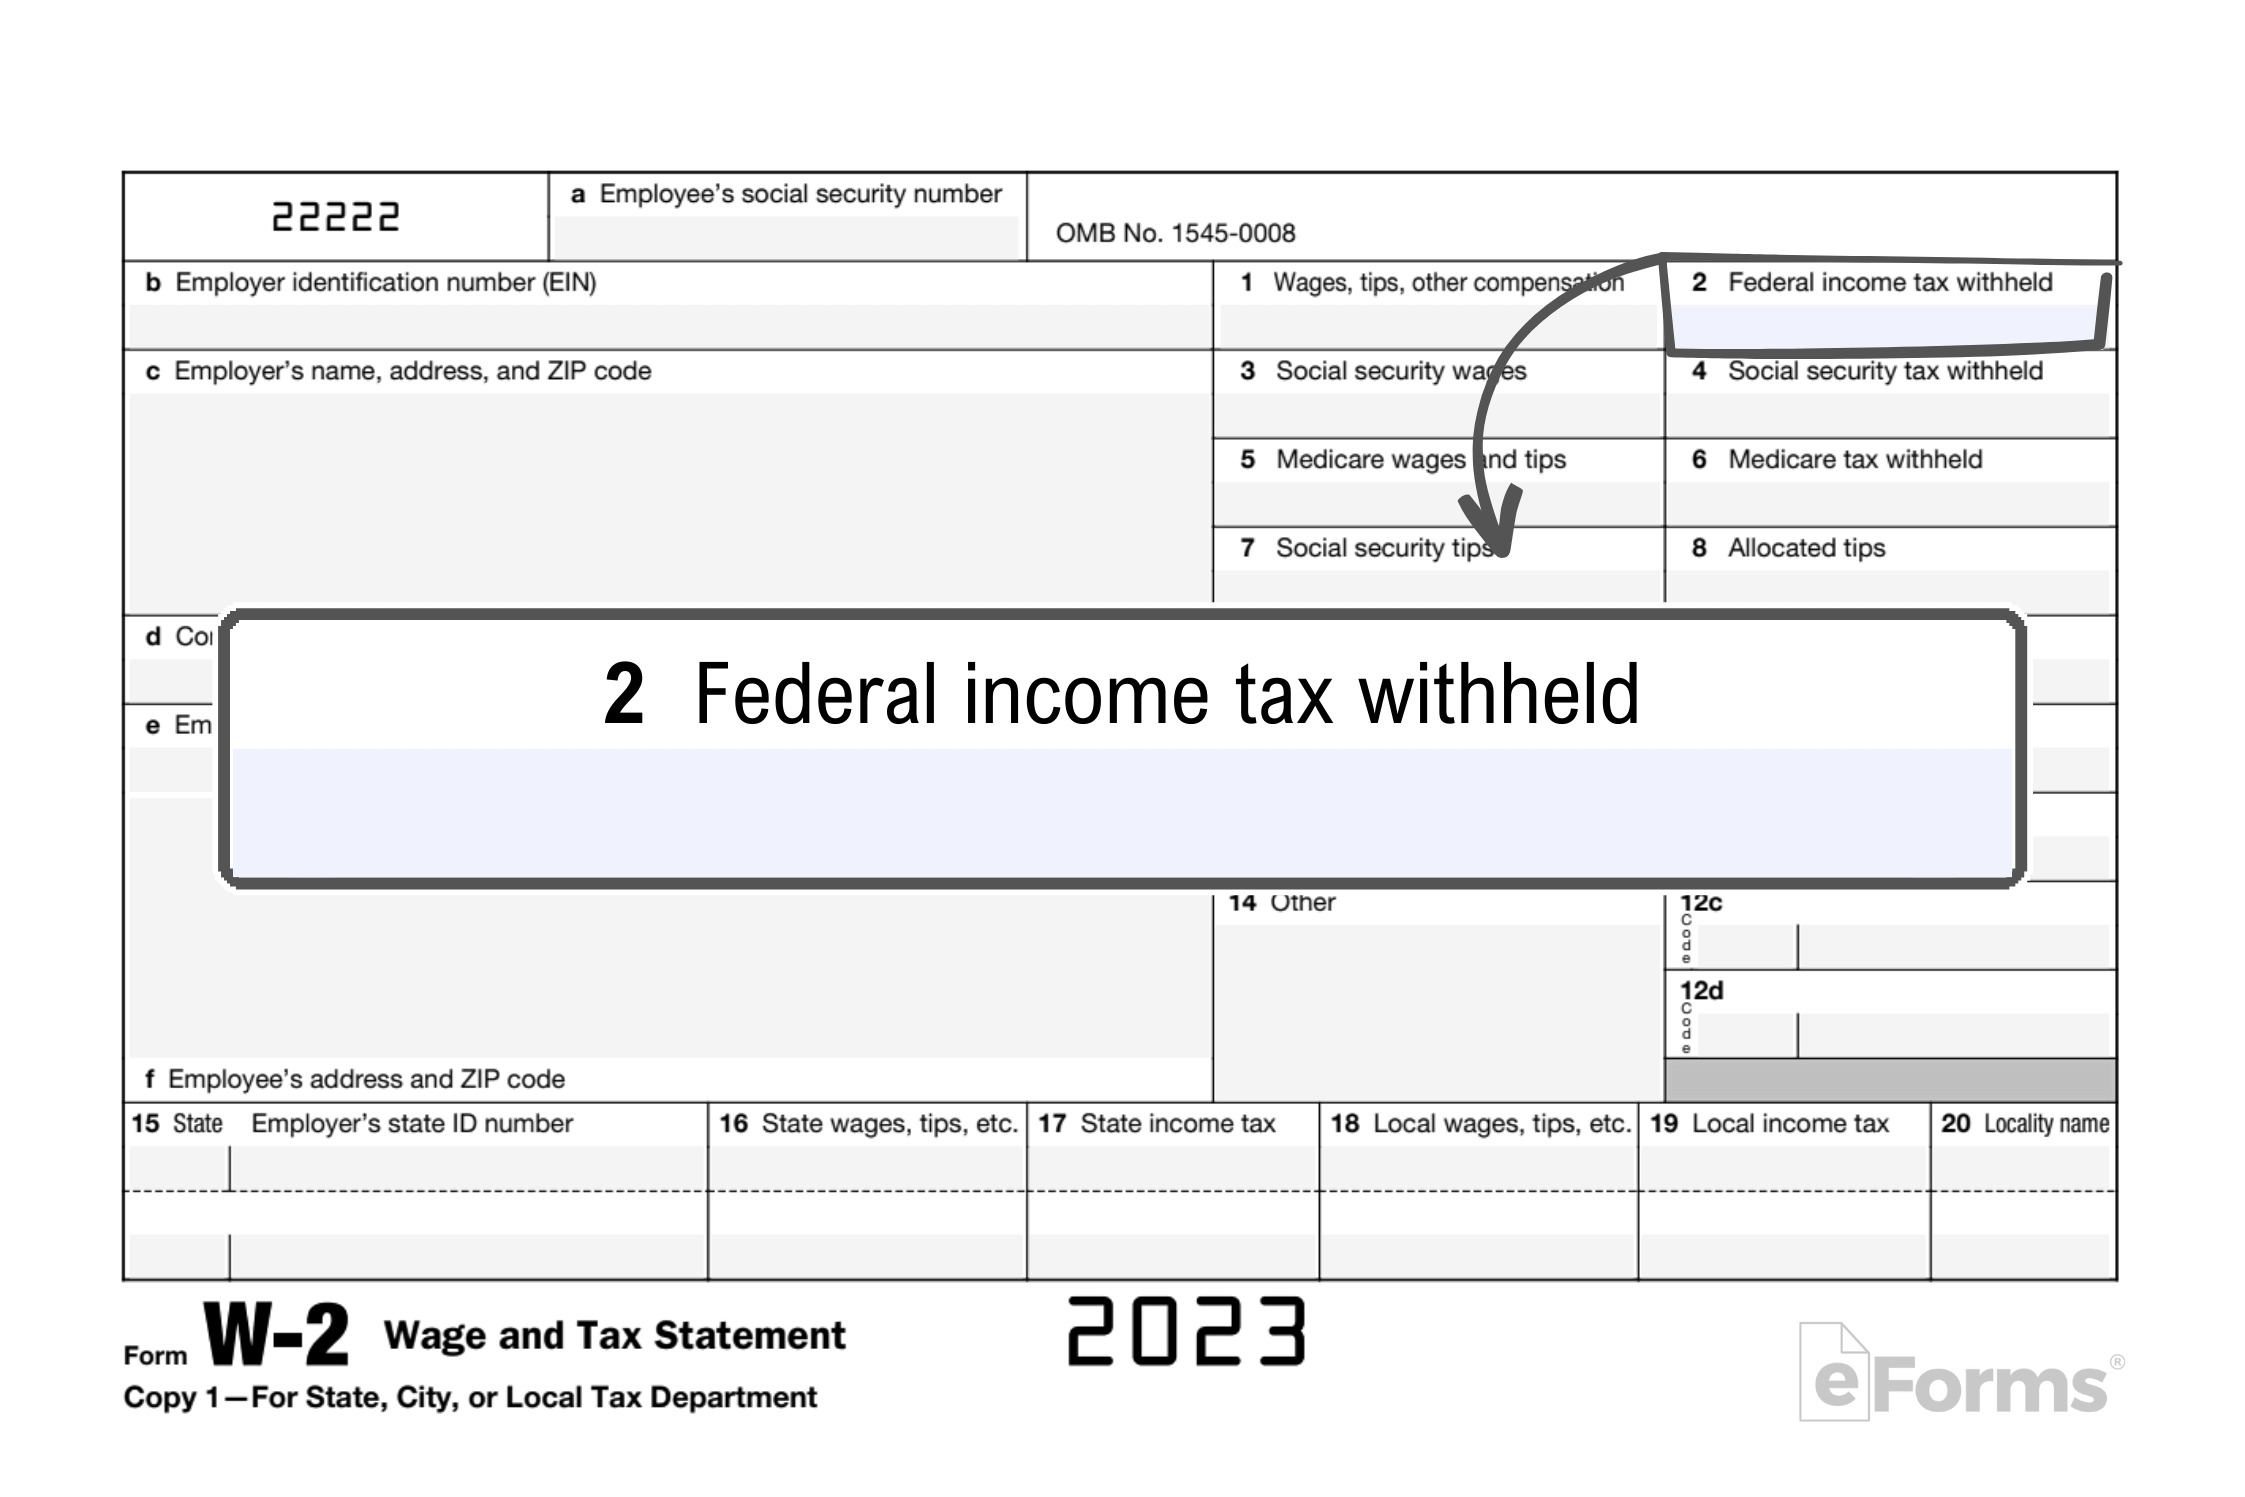 Federal income Tax witheld